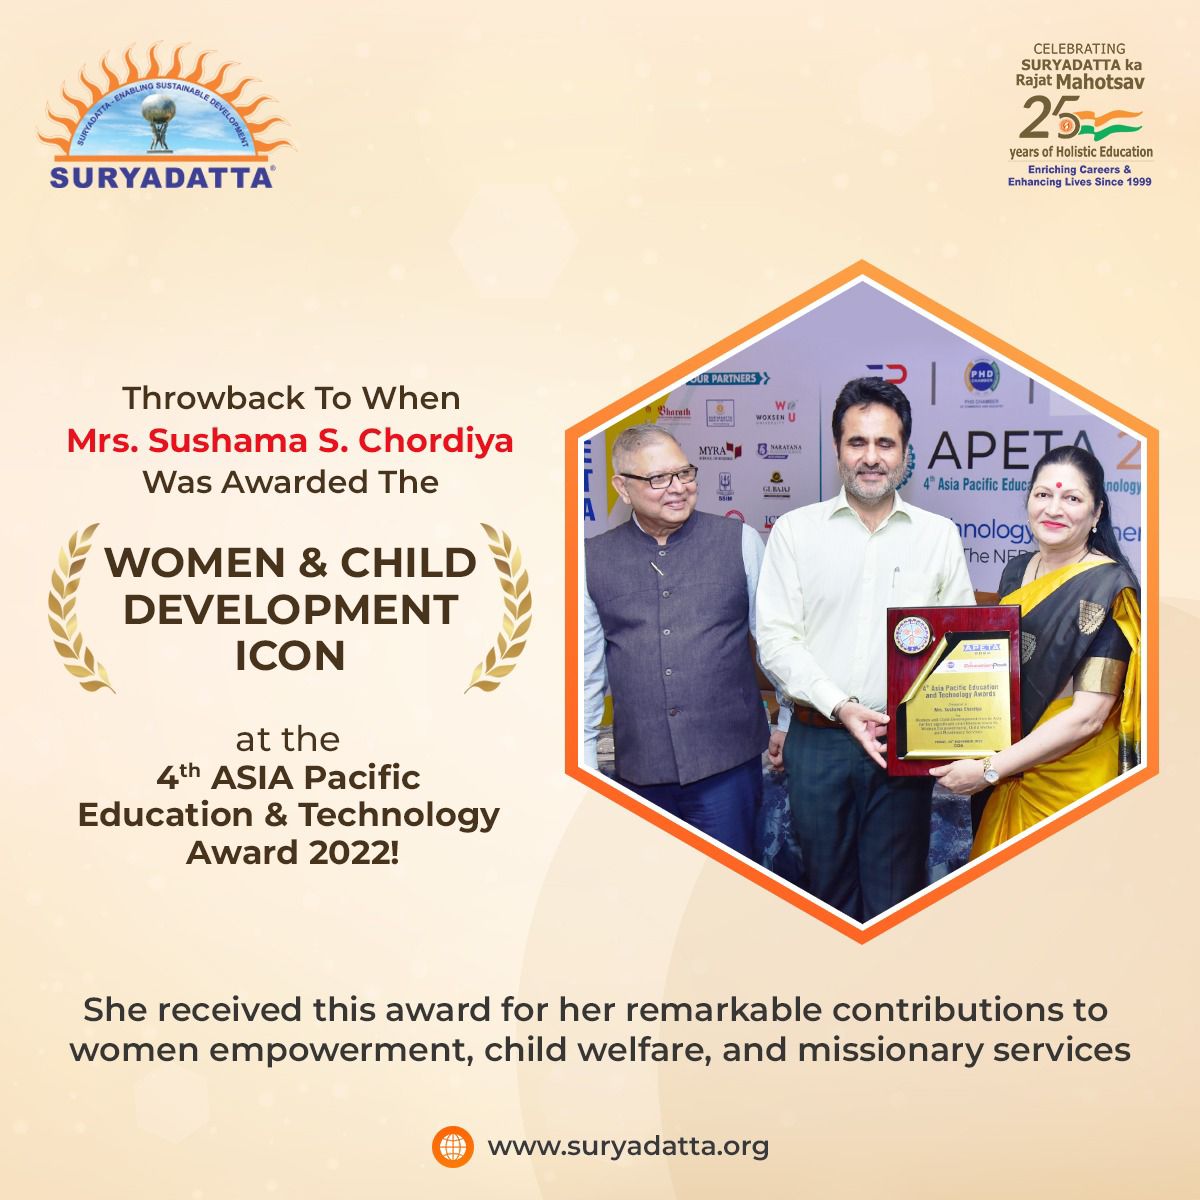 'Throwback to Mrs. Sushama S. Chordiya's 'Women and Child Development Icon in #AsiaAward' at the 4th ASIA Pacific #Education & Technology Summit in Goa, Nov 25, 2022! Her tireless efforts in education inspire countless lives. 🌟 #SGI #Throwback #MrsSushmaSChordiya #Award